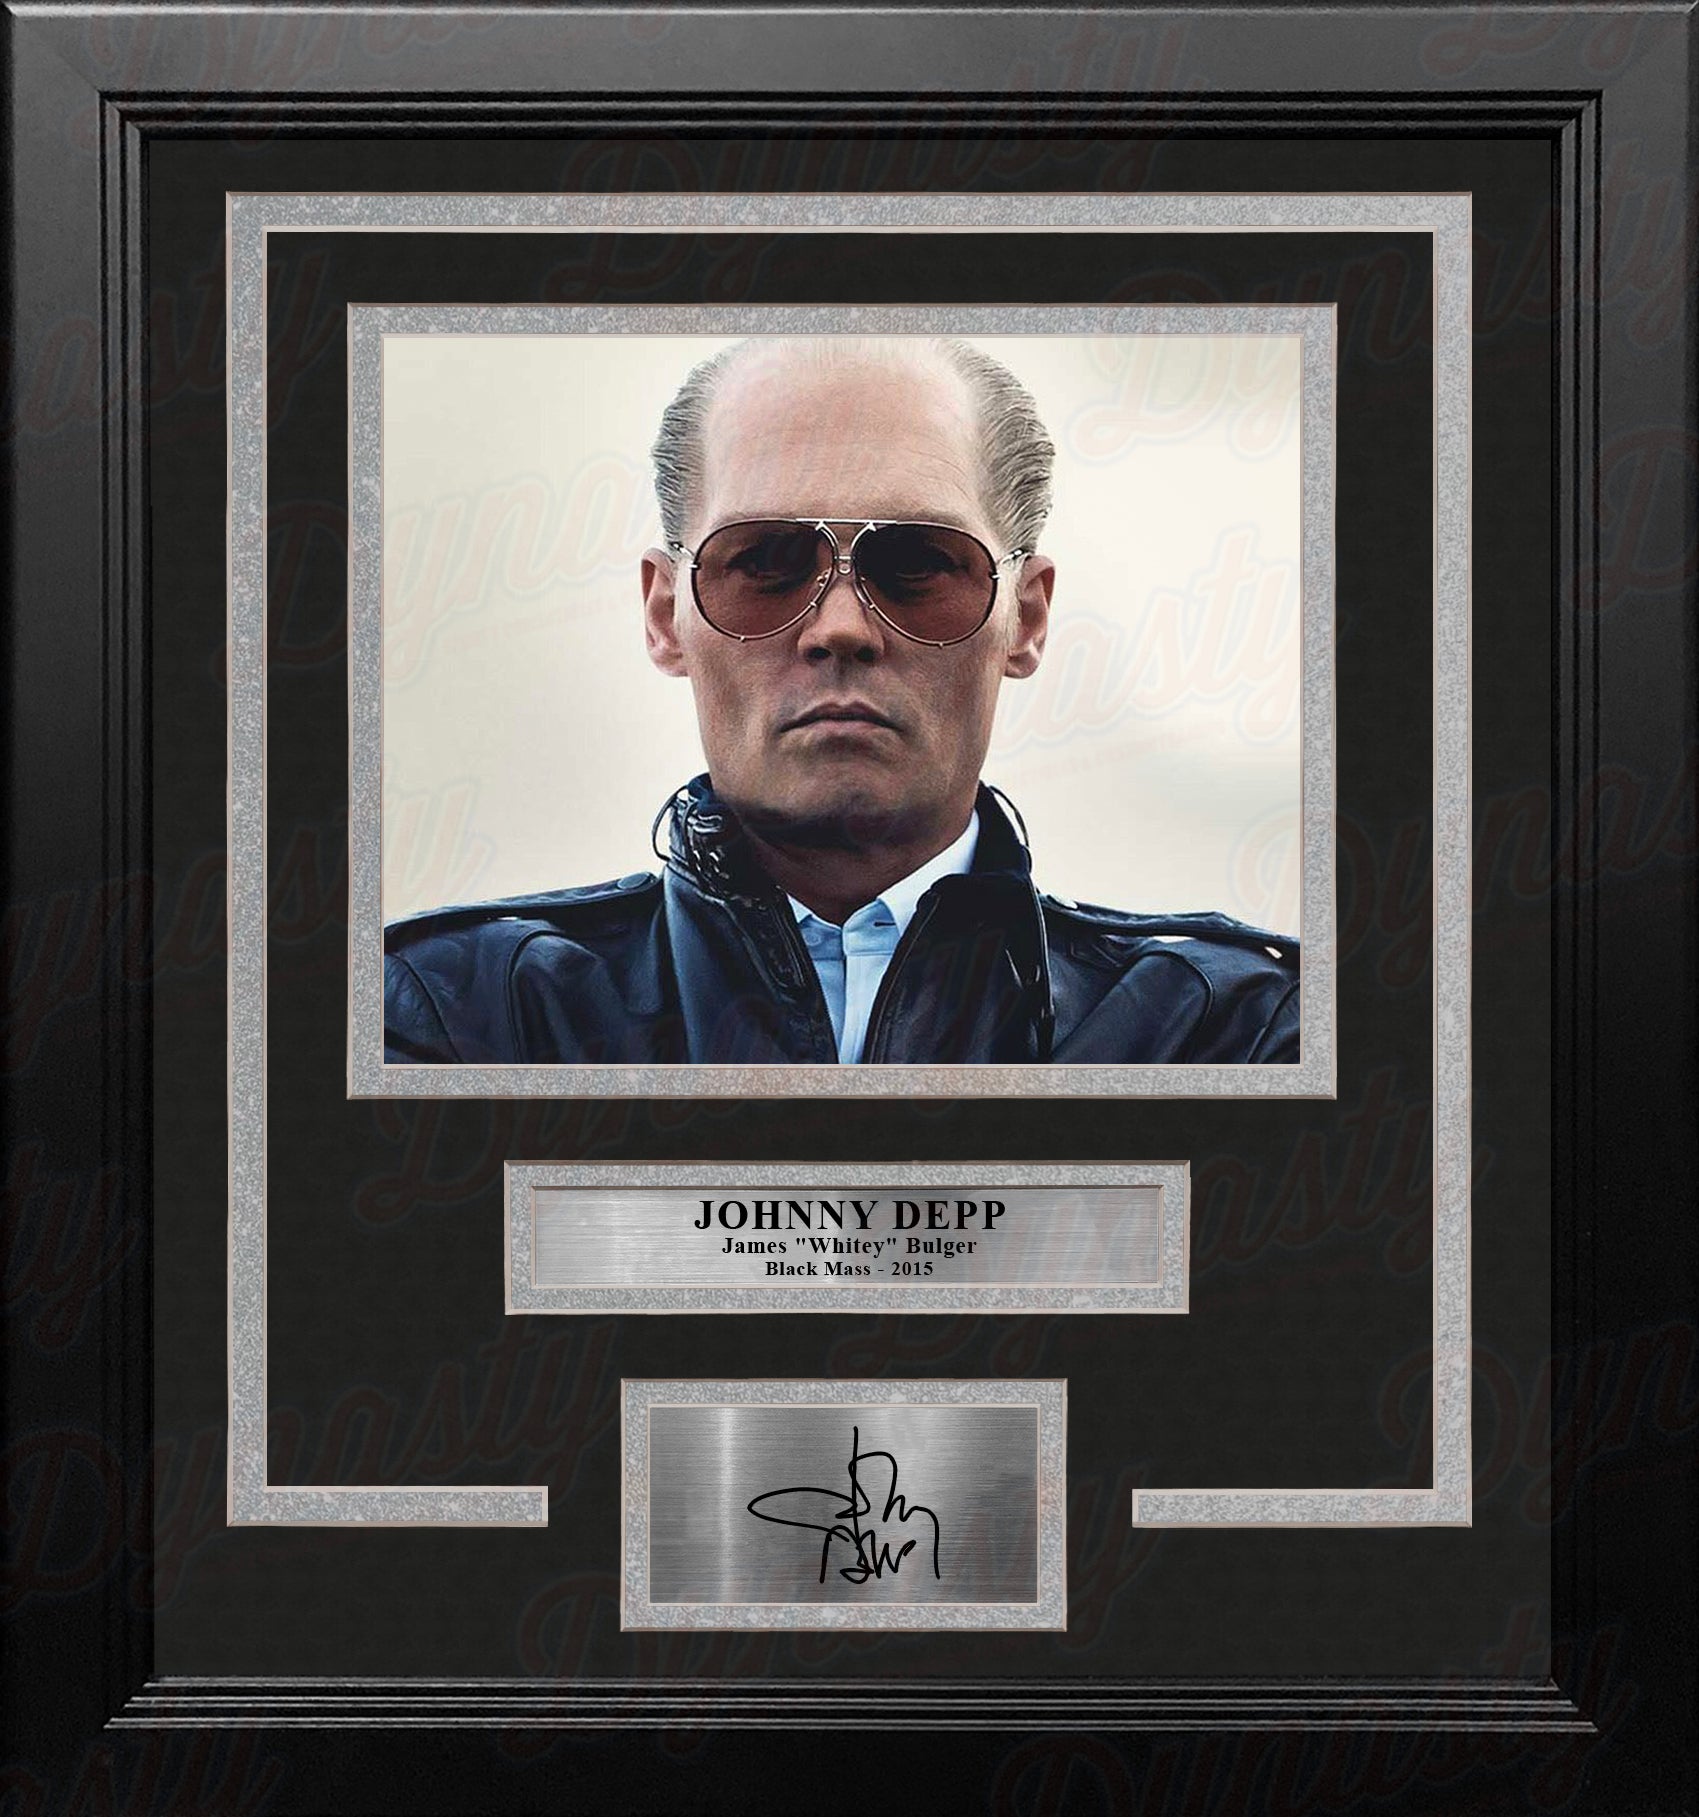 Johnny Depp Black Mass 8" x 10" Framed Photo with Engraved Autograph - Dynasty Sports & Framing 